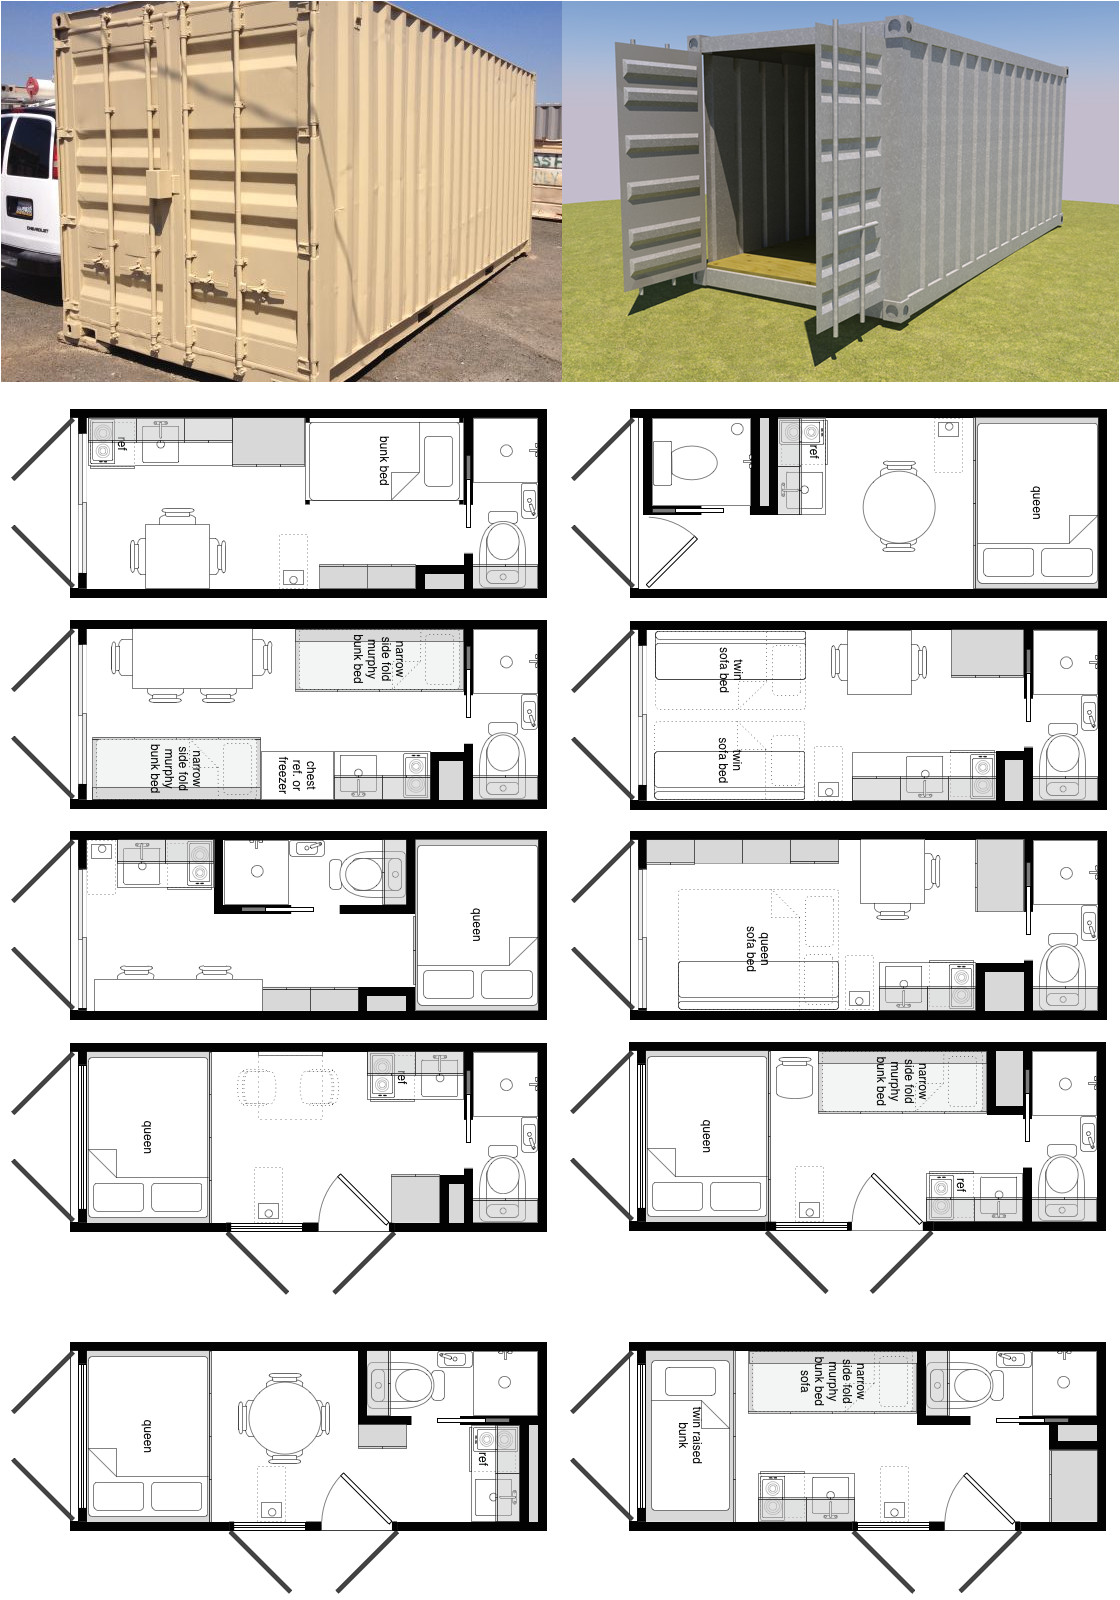 20 foot shipping container floor plan brainstorm